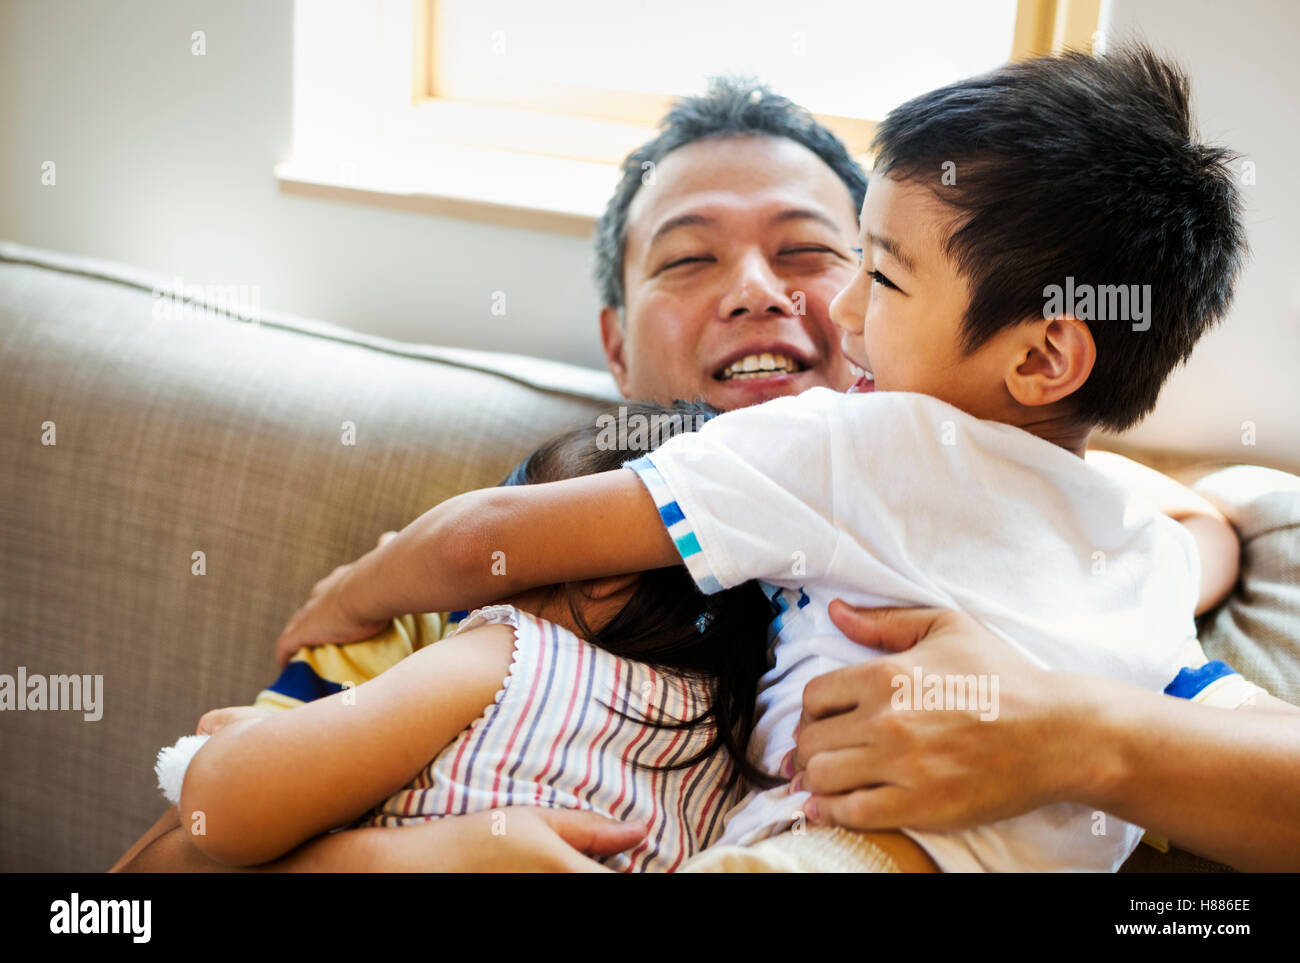 Family home. A man cuddling his daughter and son on a sofa. Stock Photo